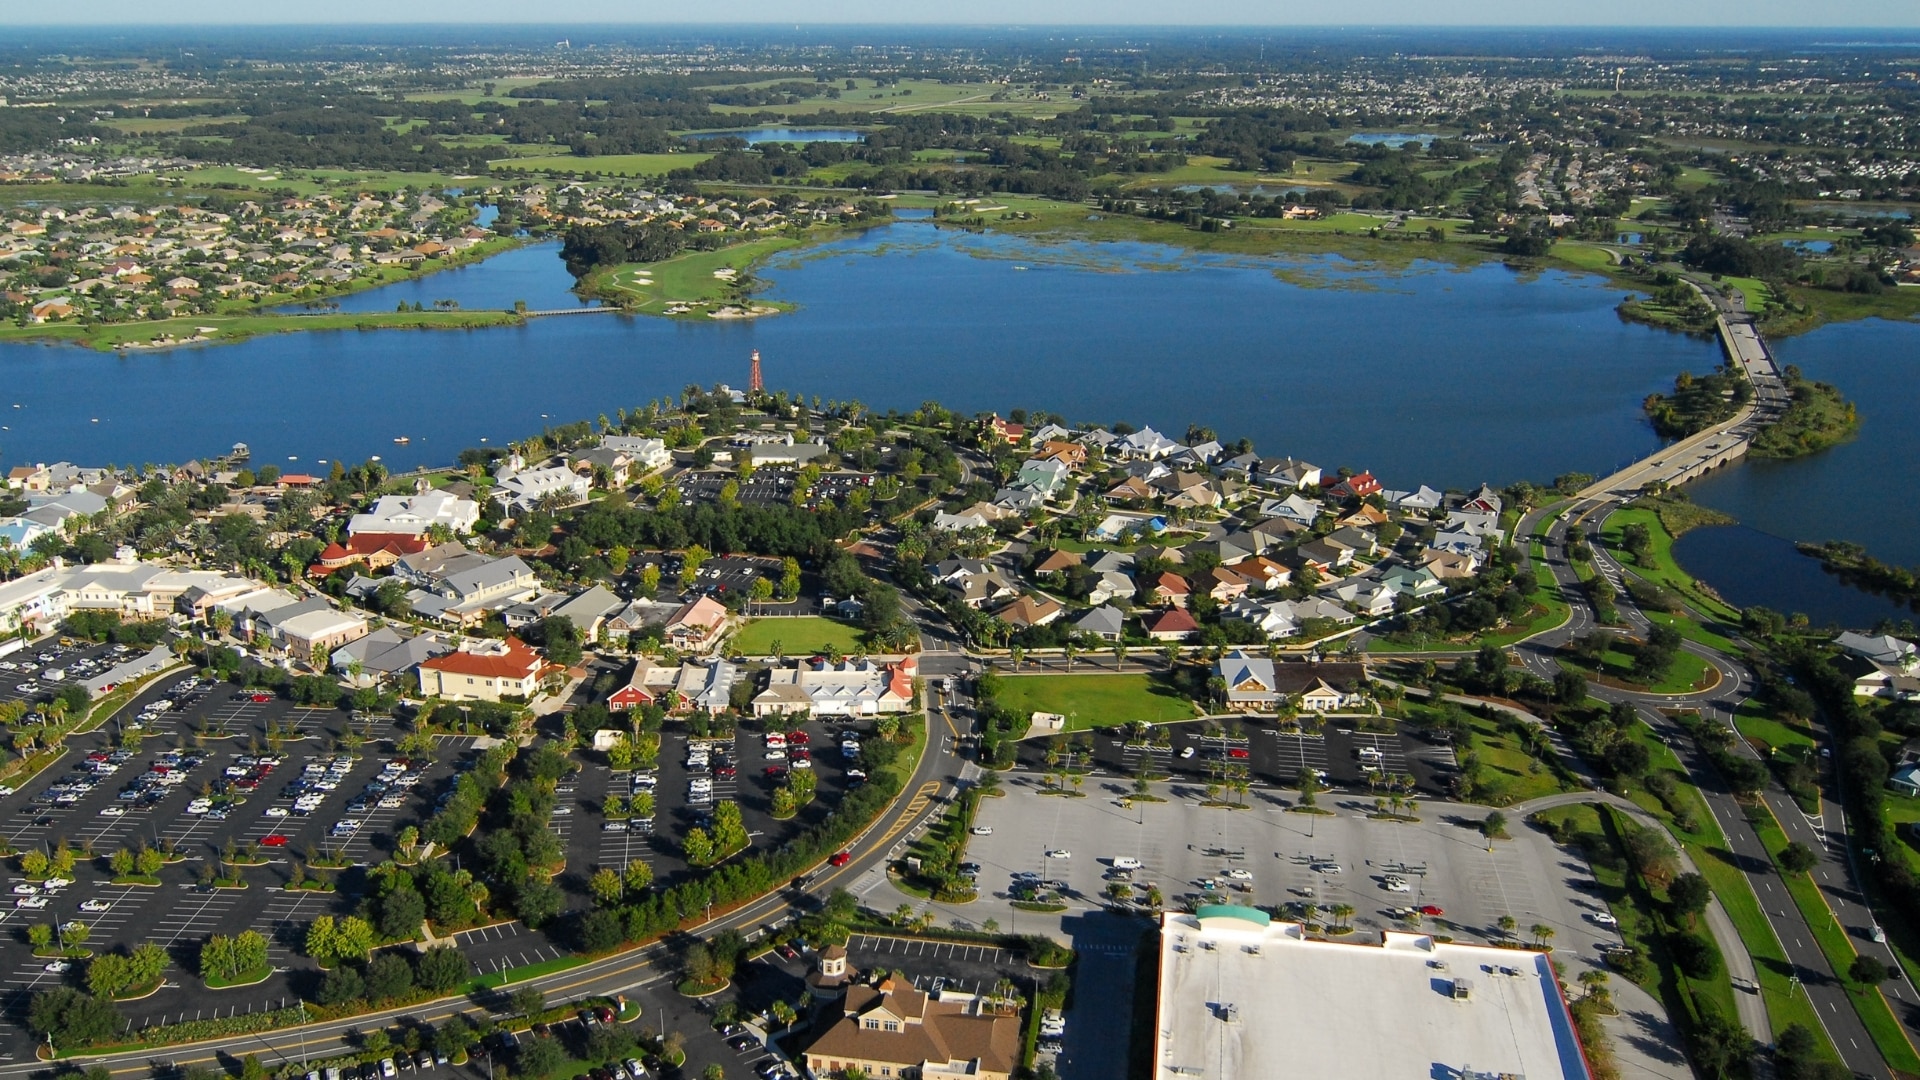 Helicopter Tours in Orlando - See Everything